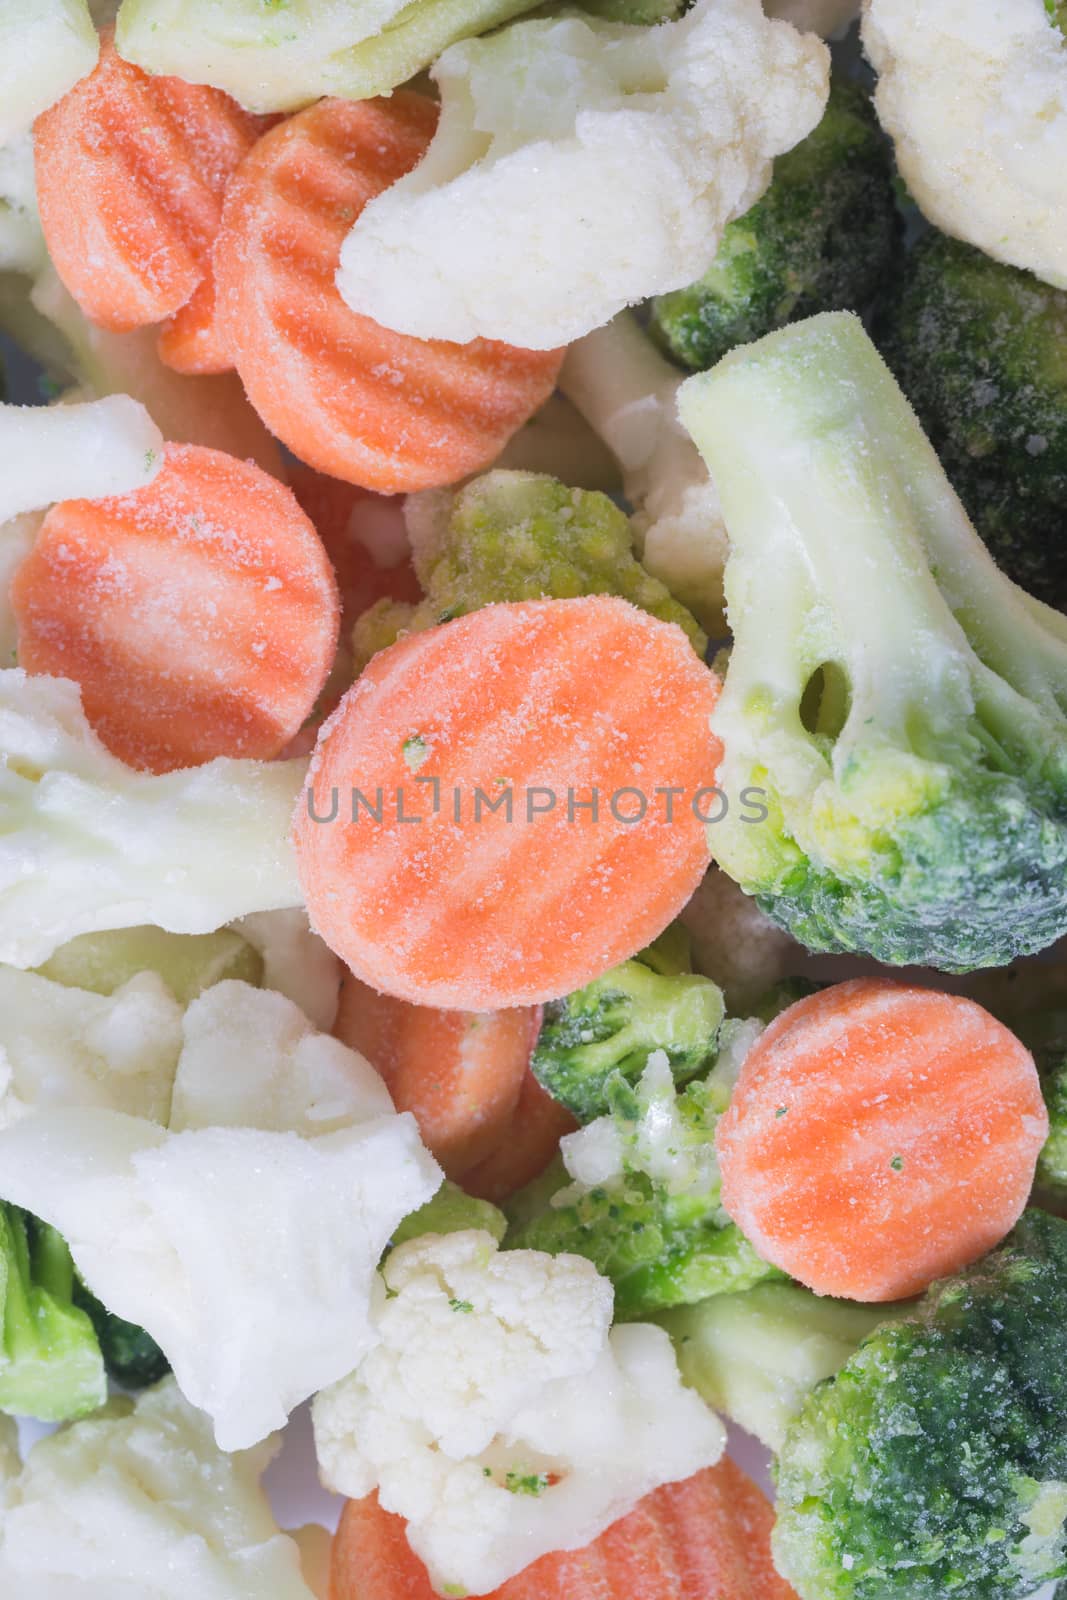 Picture of a bunch of frozen vegetables with most of the picture carrots